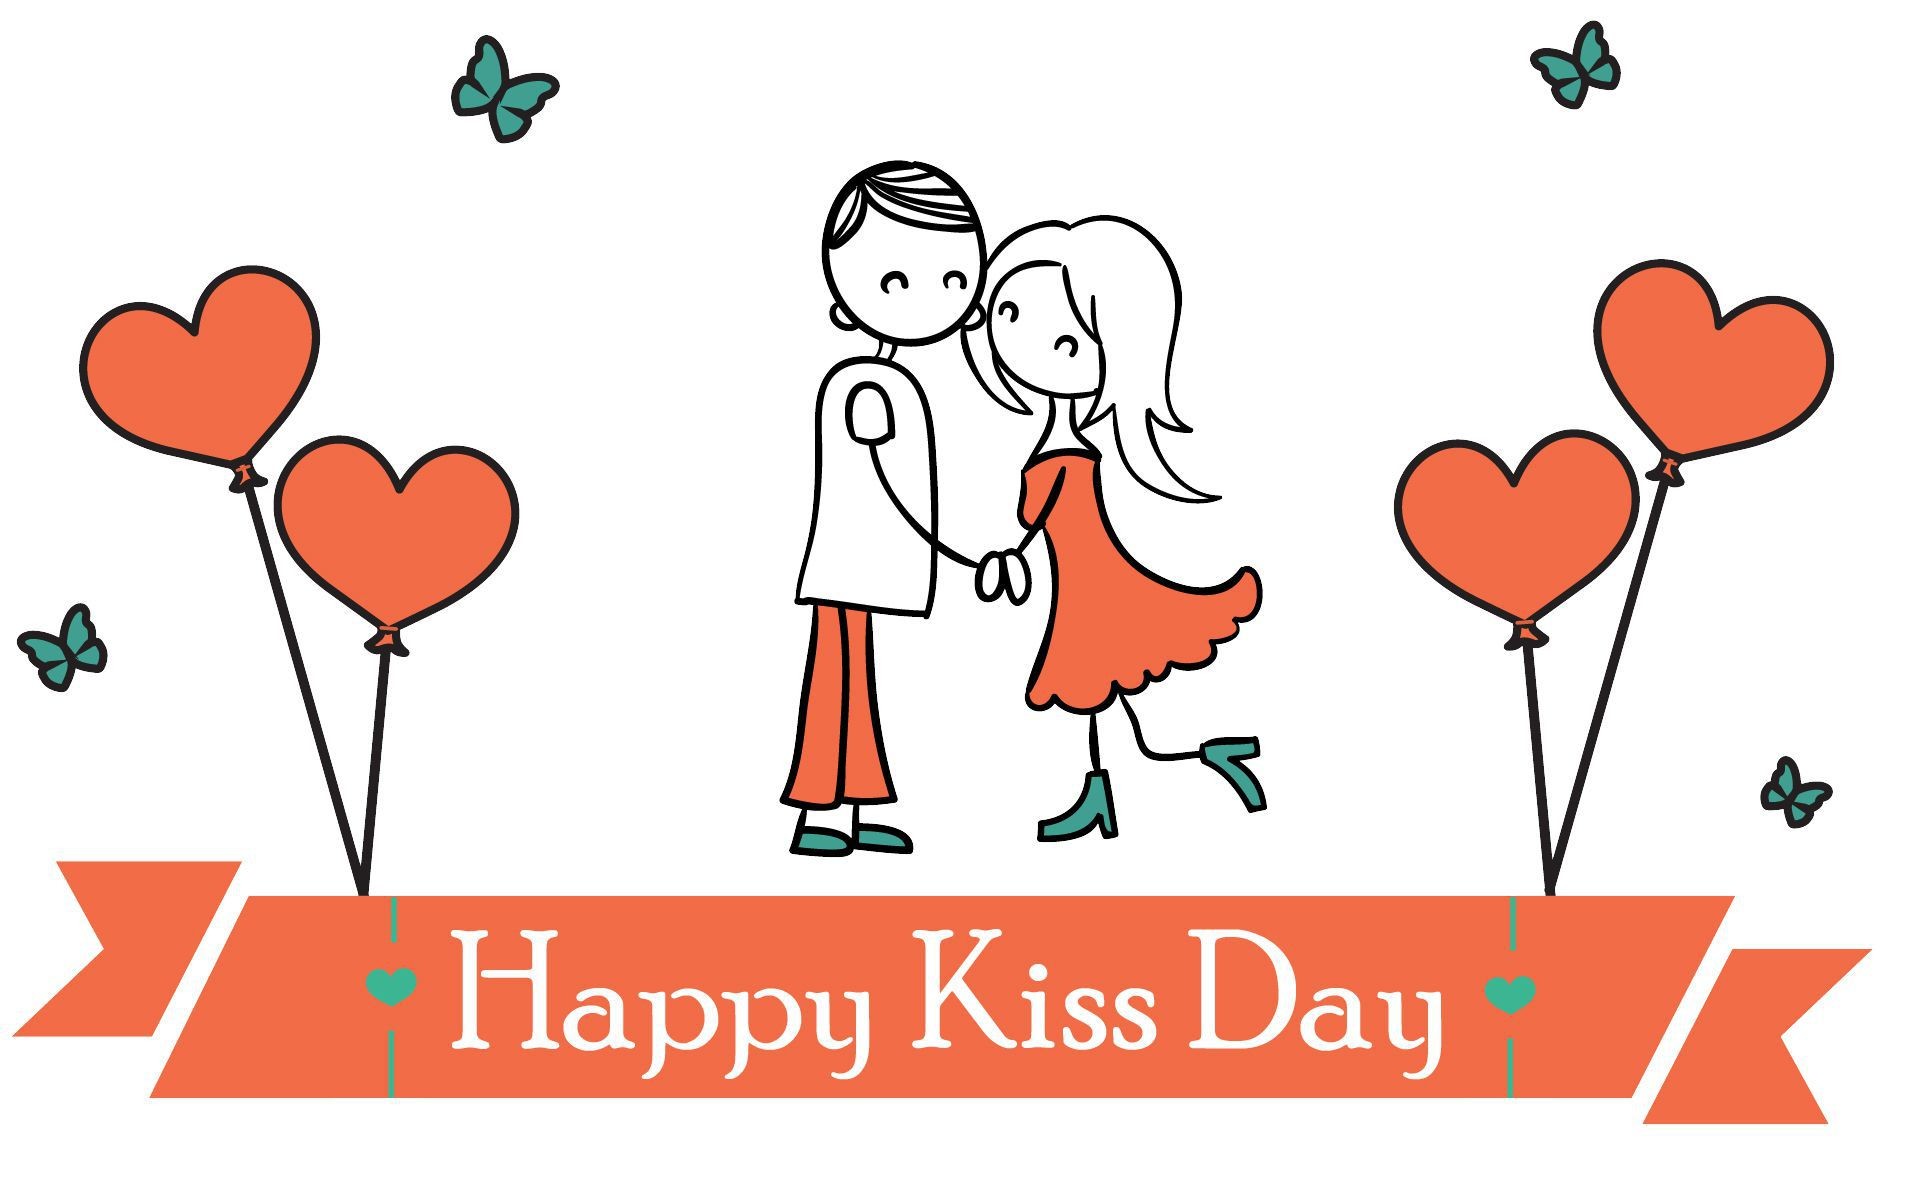 Happy kiss day images 2017